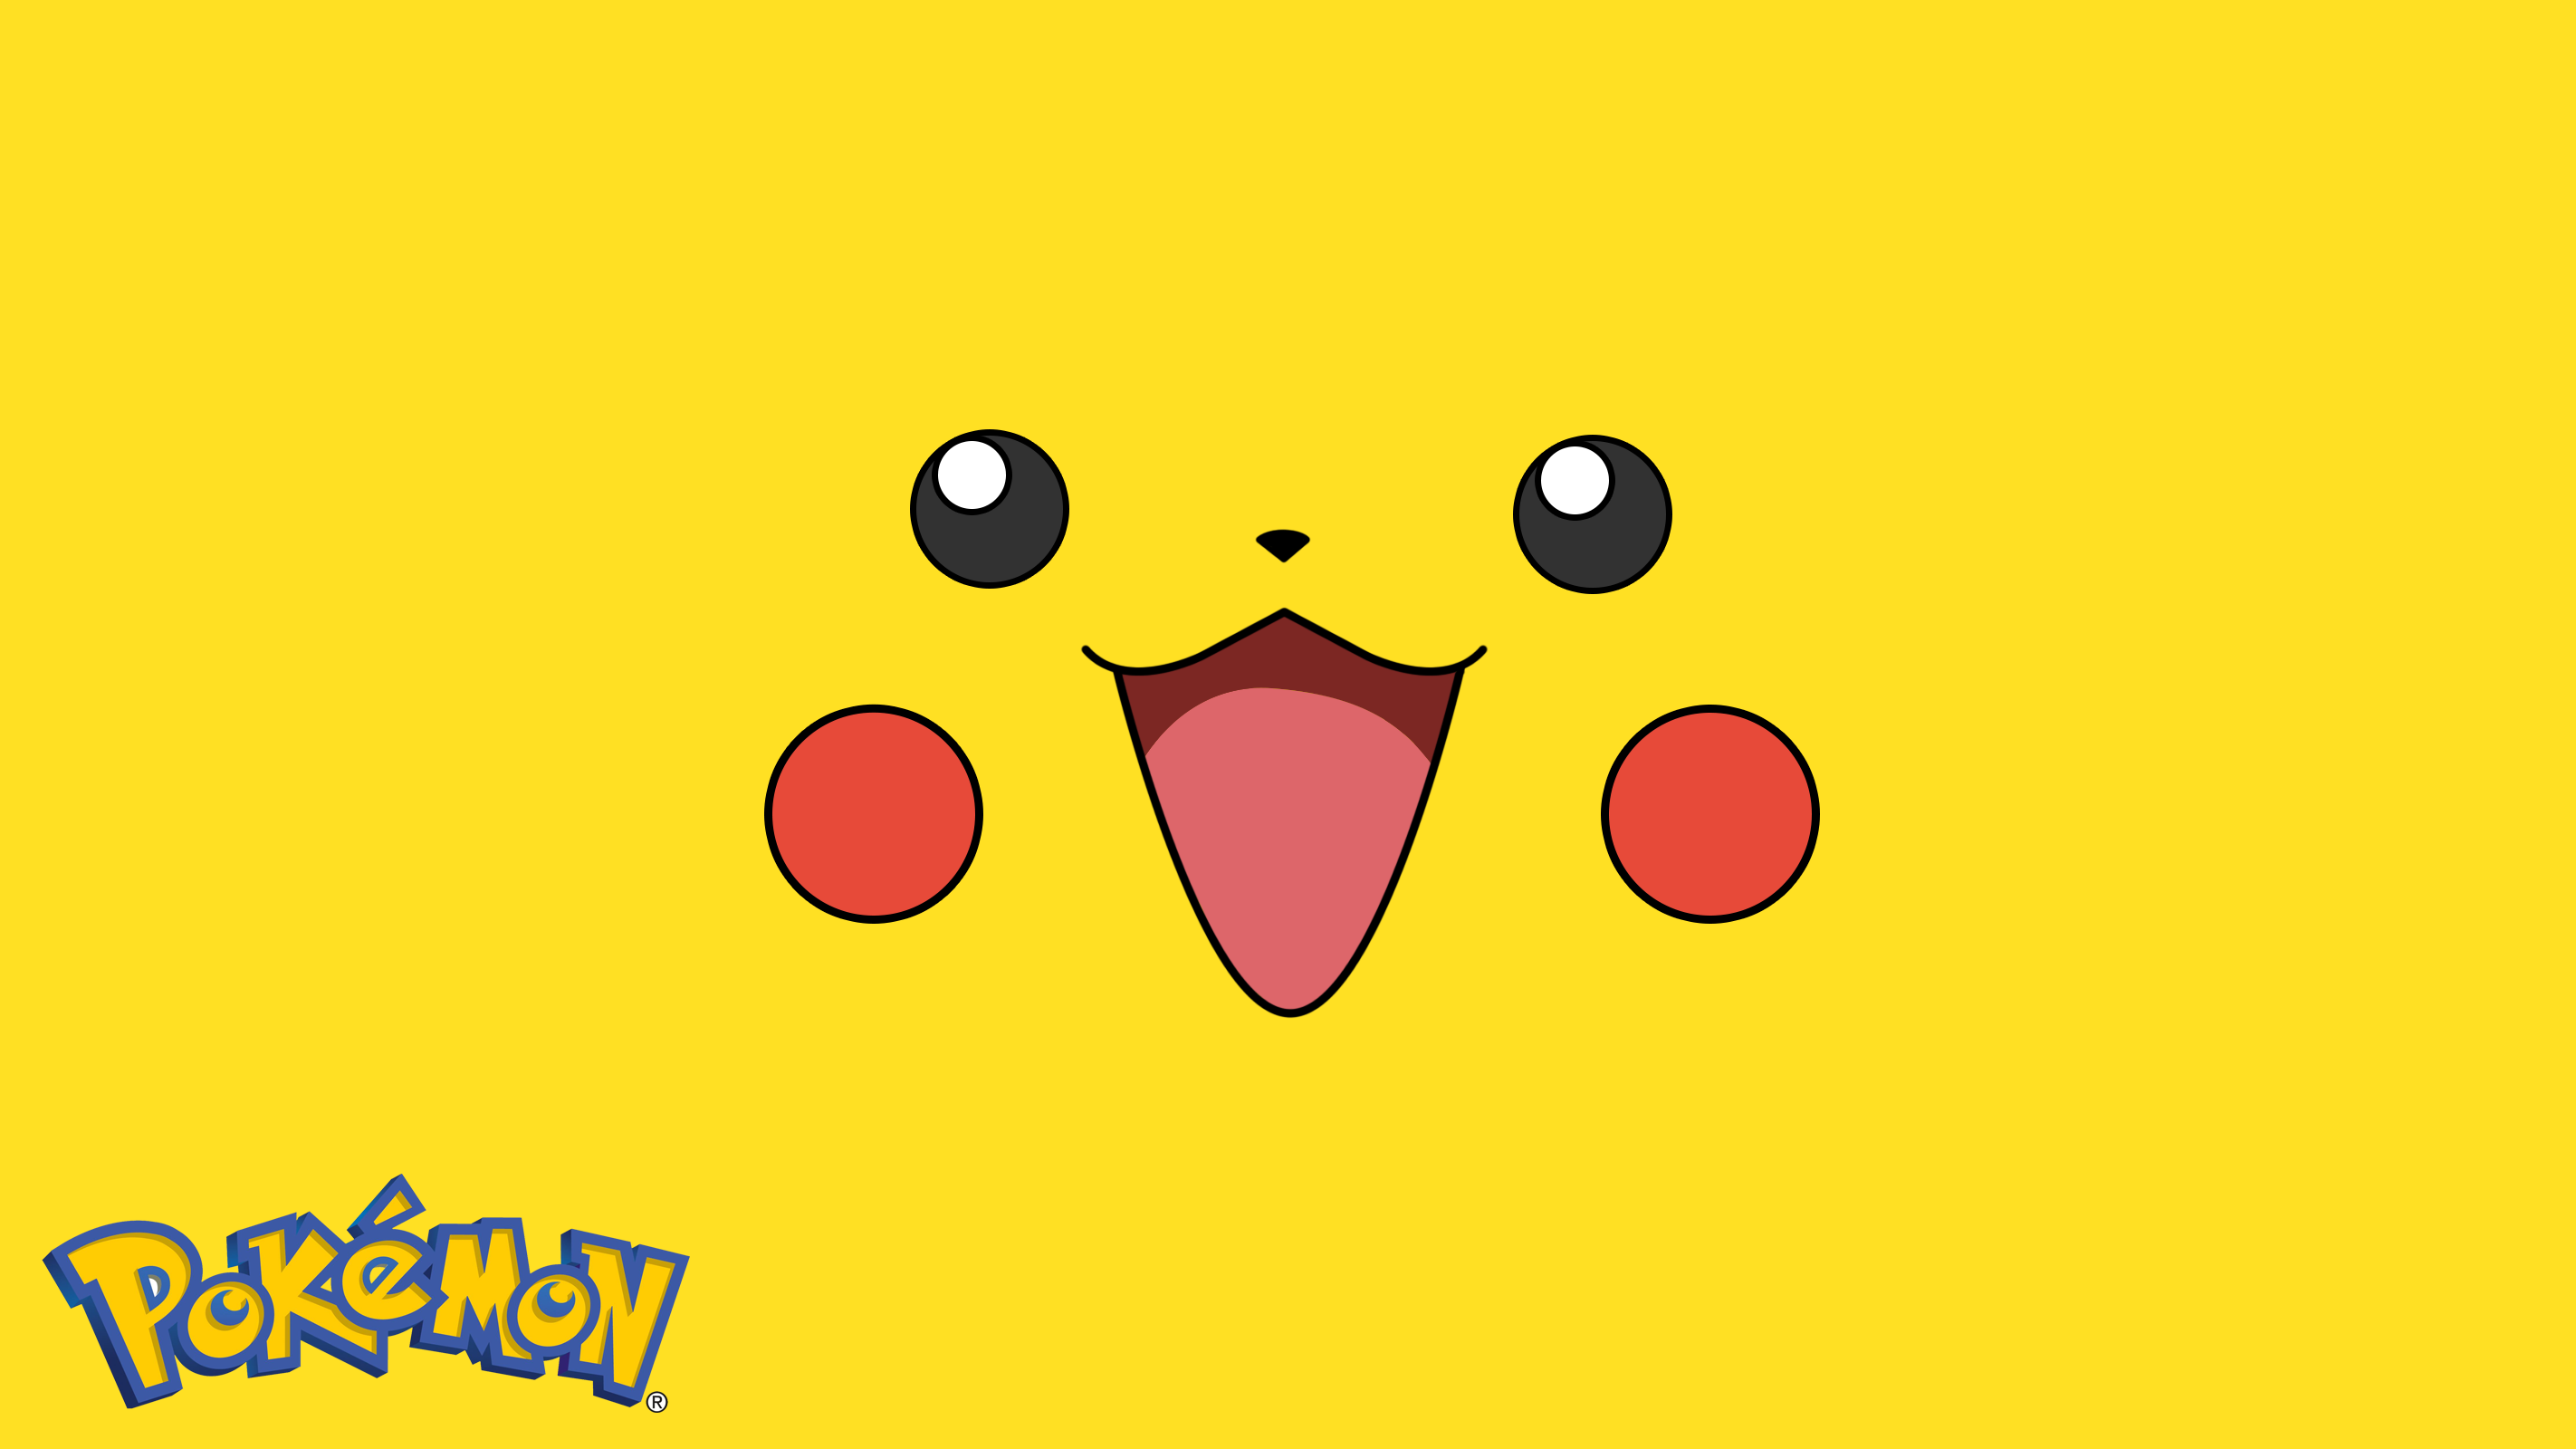 Pikachu wallpaper :D I saw it in a lower ressolution and did in higher one, for you! [2845x1600]